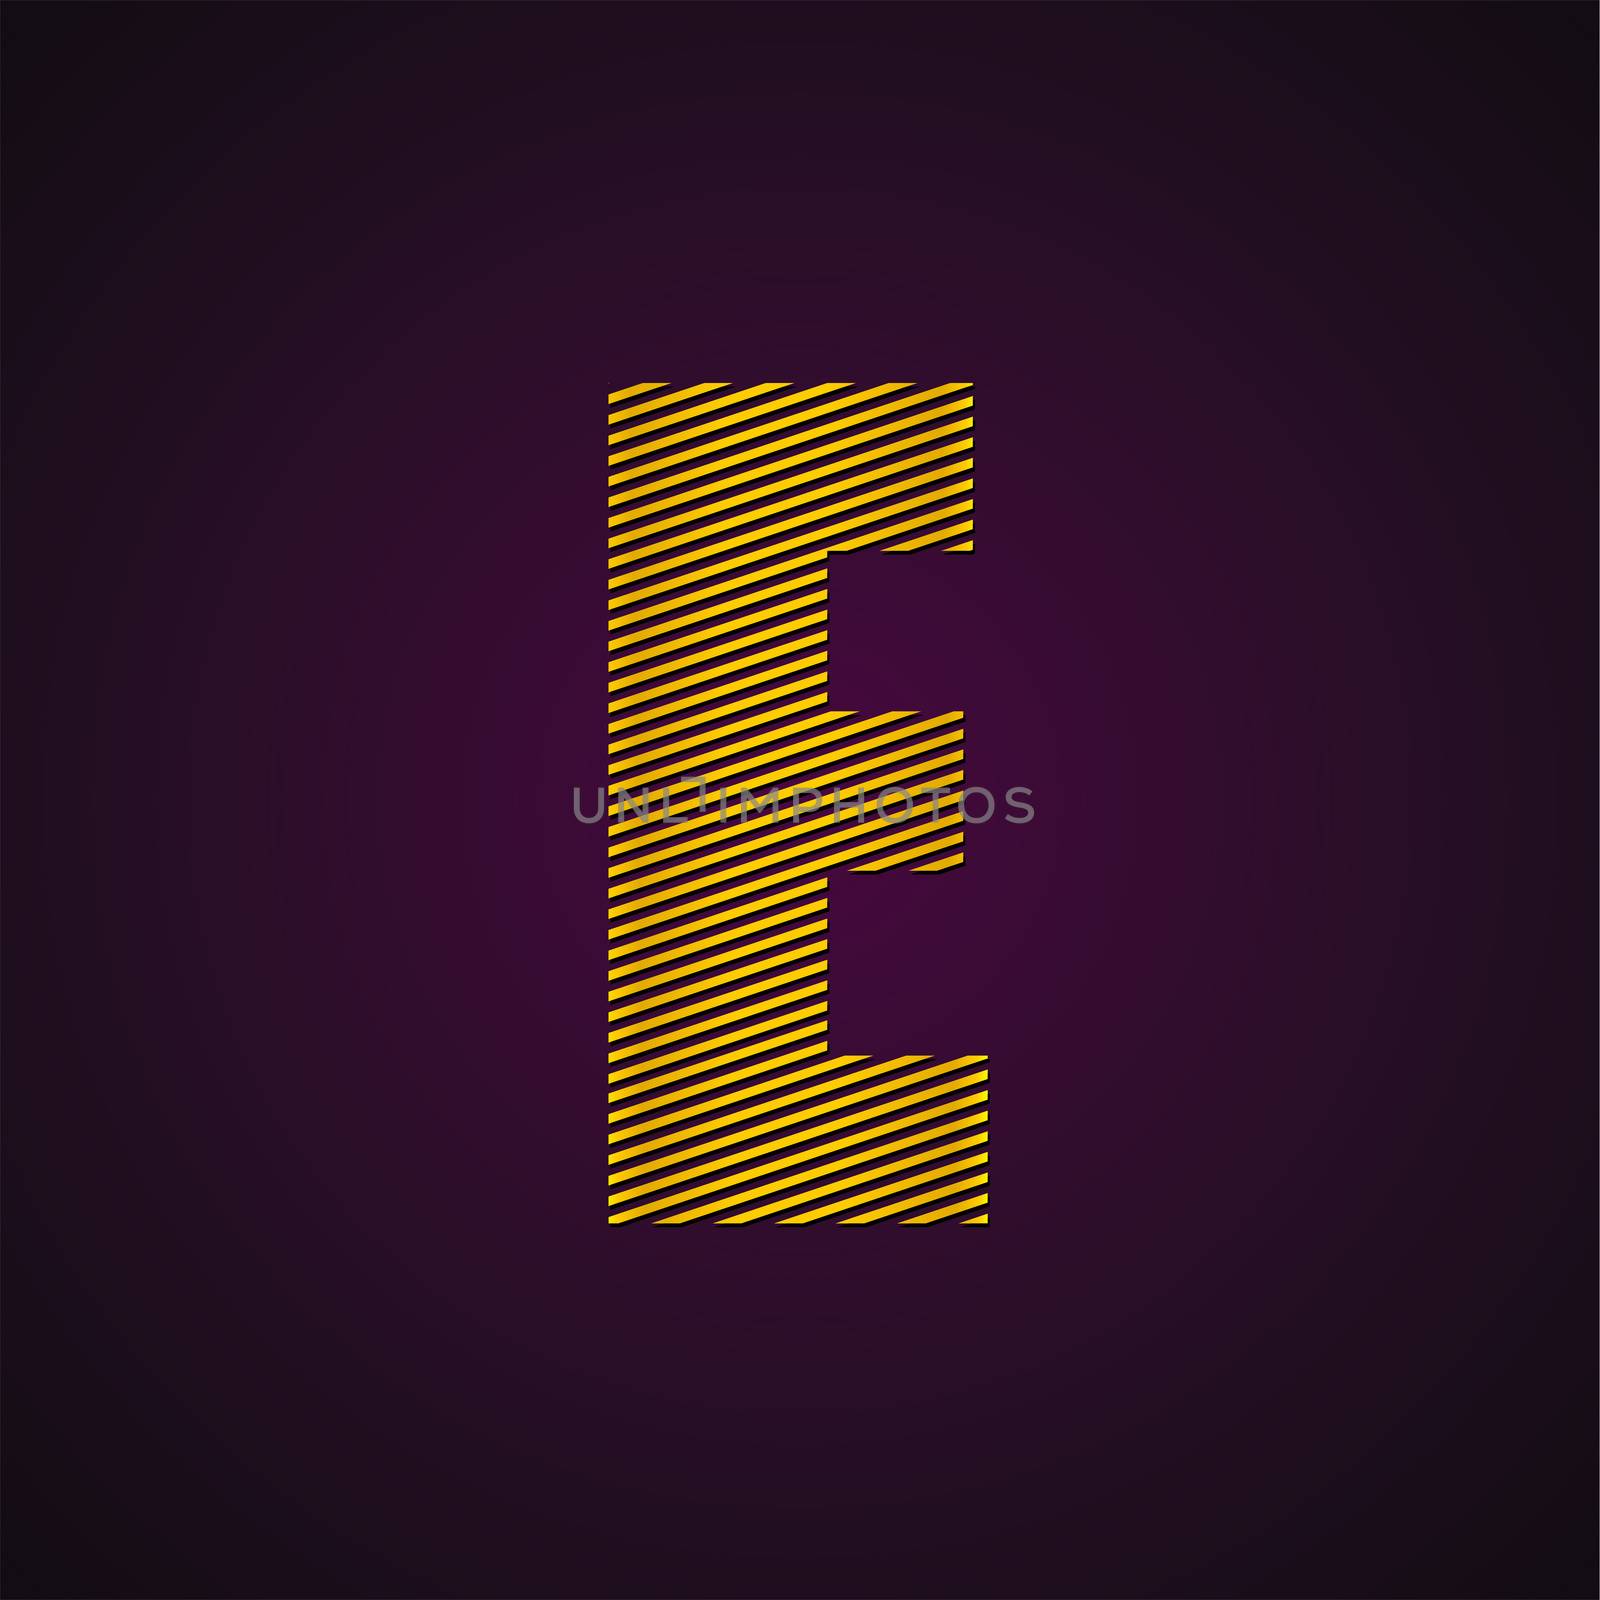 Embroidery Typography background with embroidery, types of embroidery